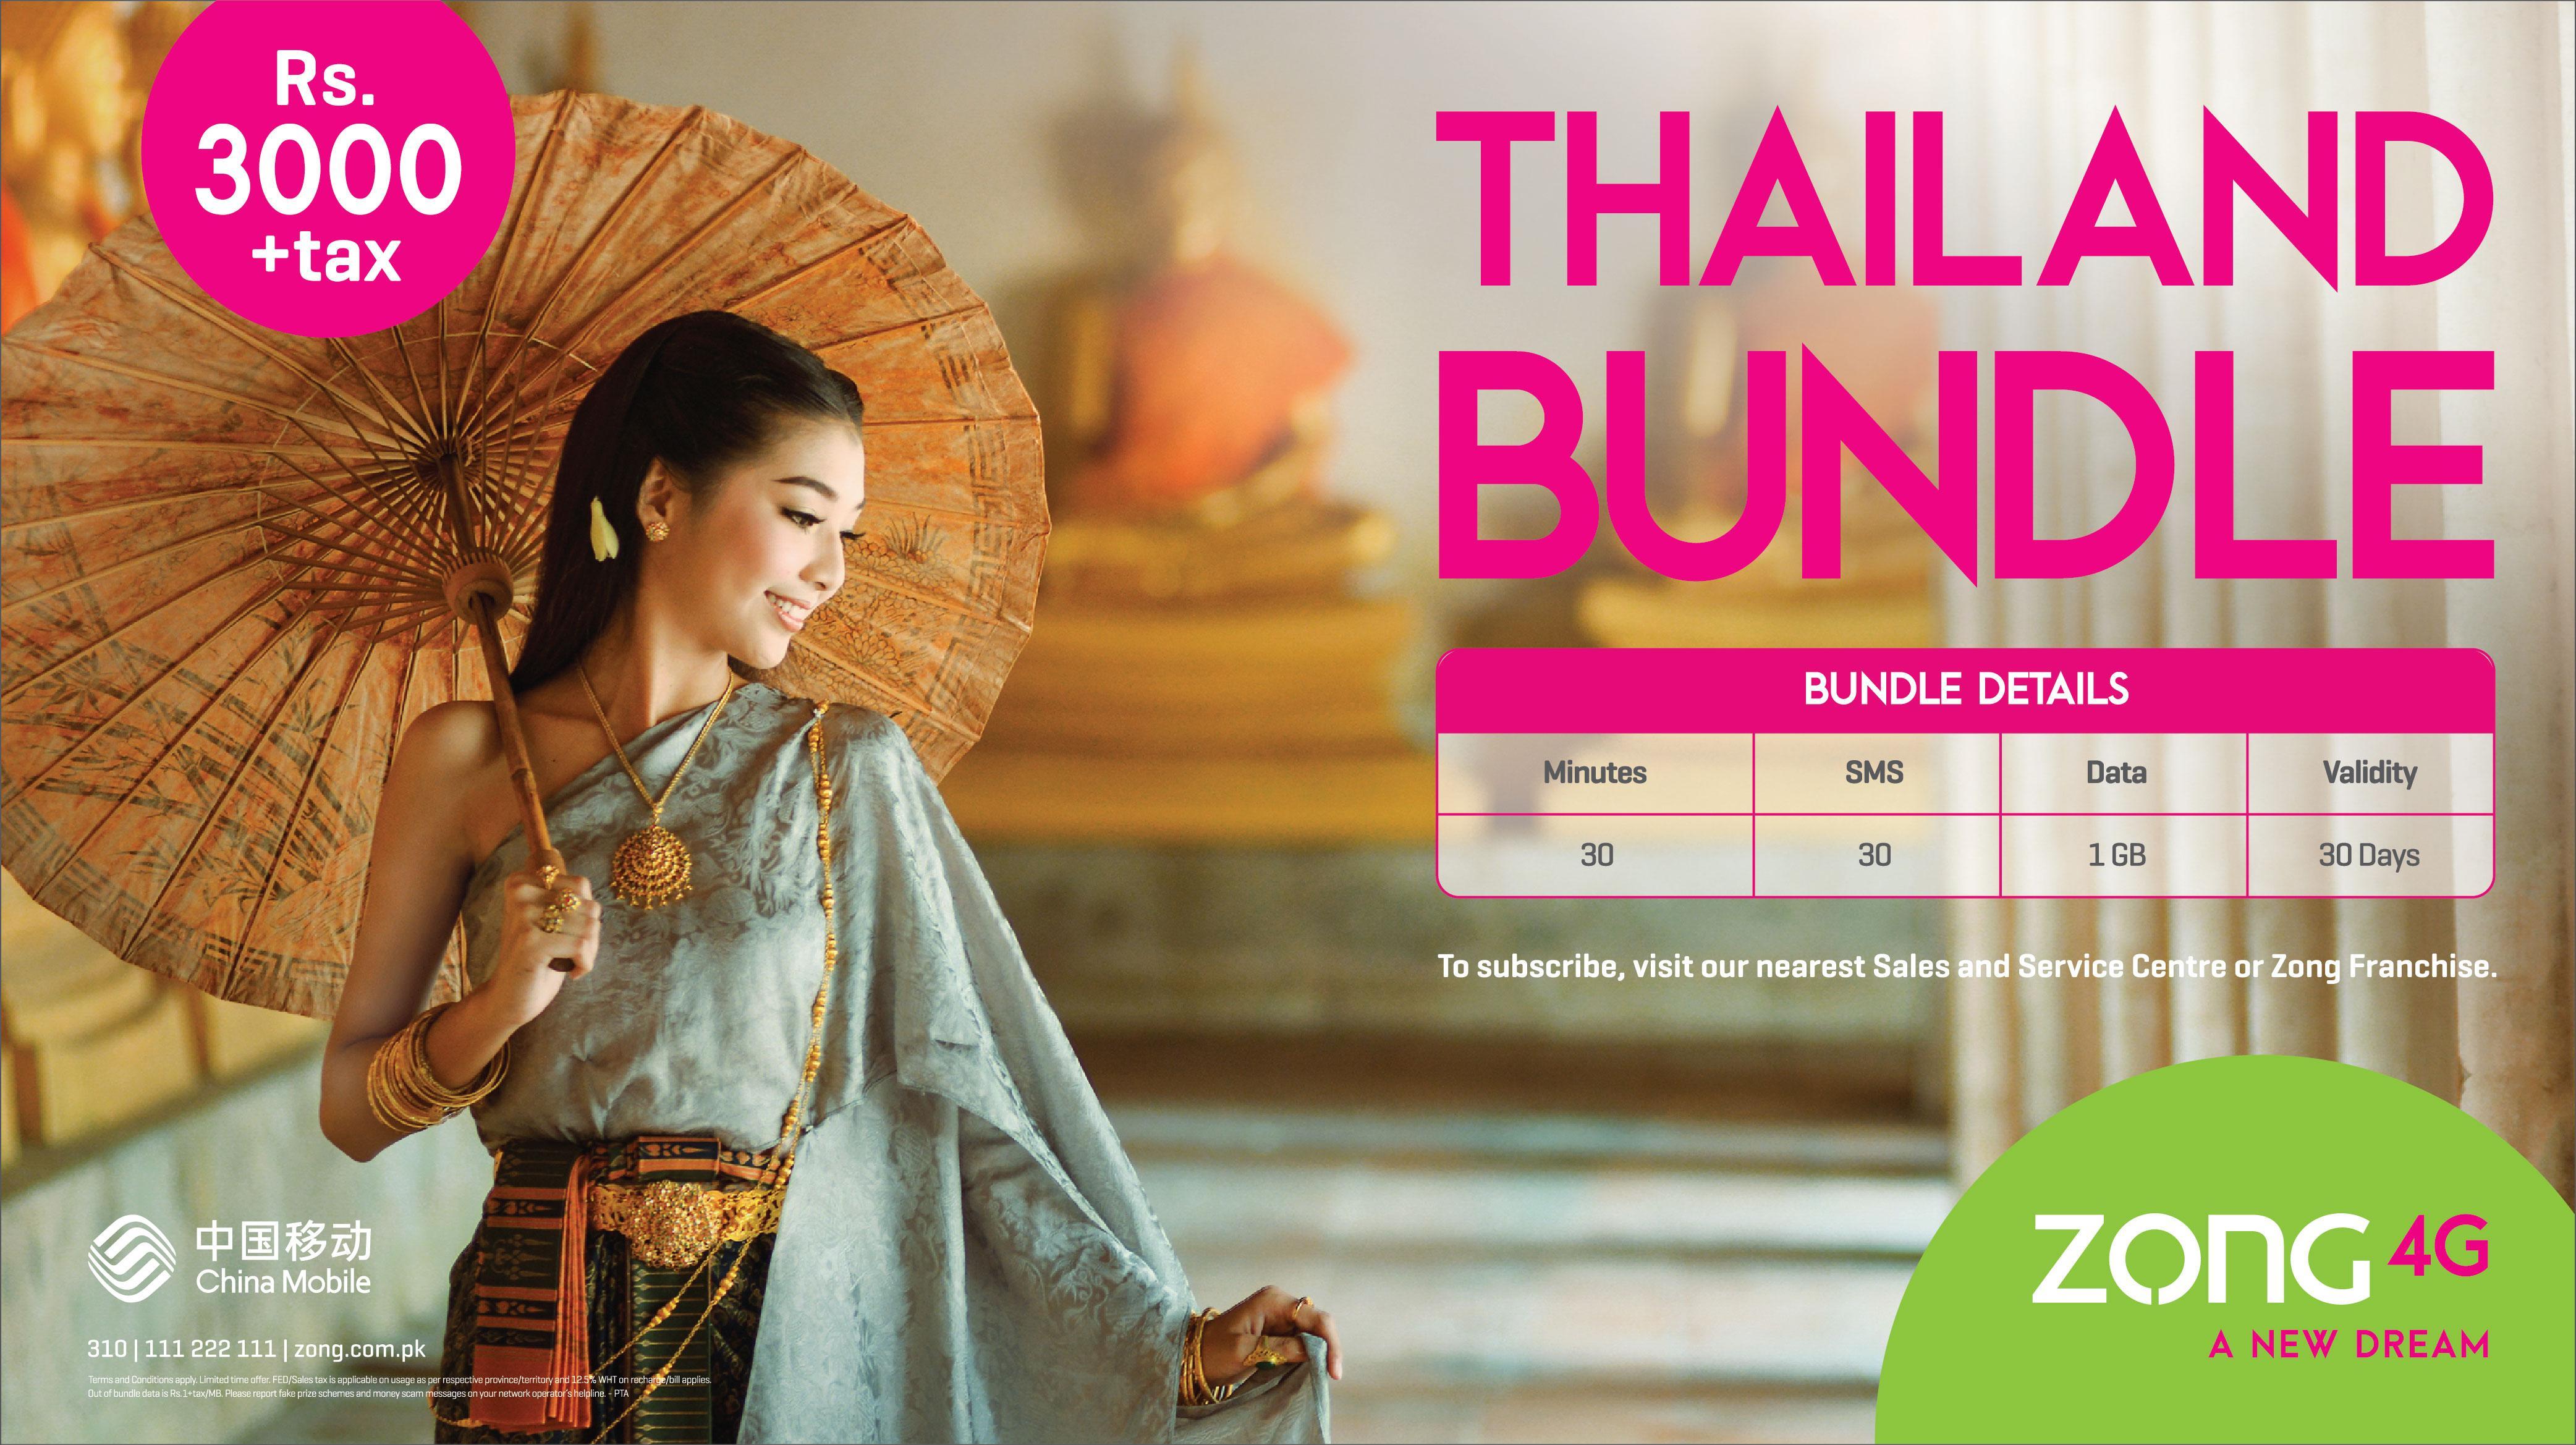 Zong Brings Exciting New Roaming Bundle for Thailand